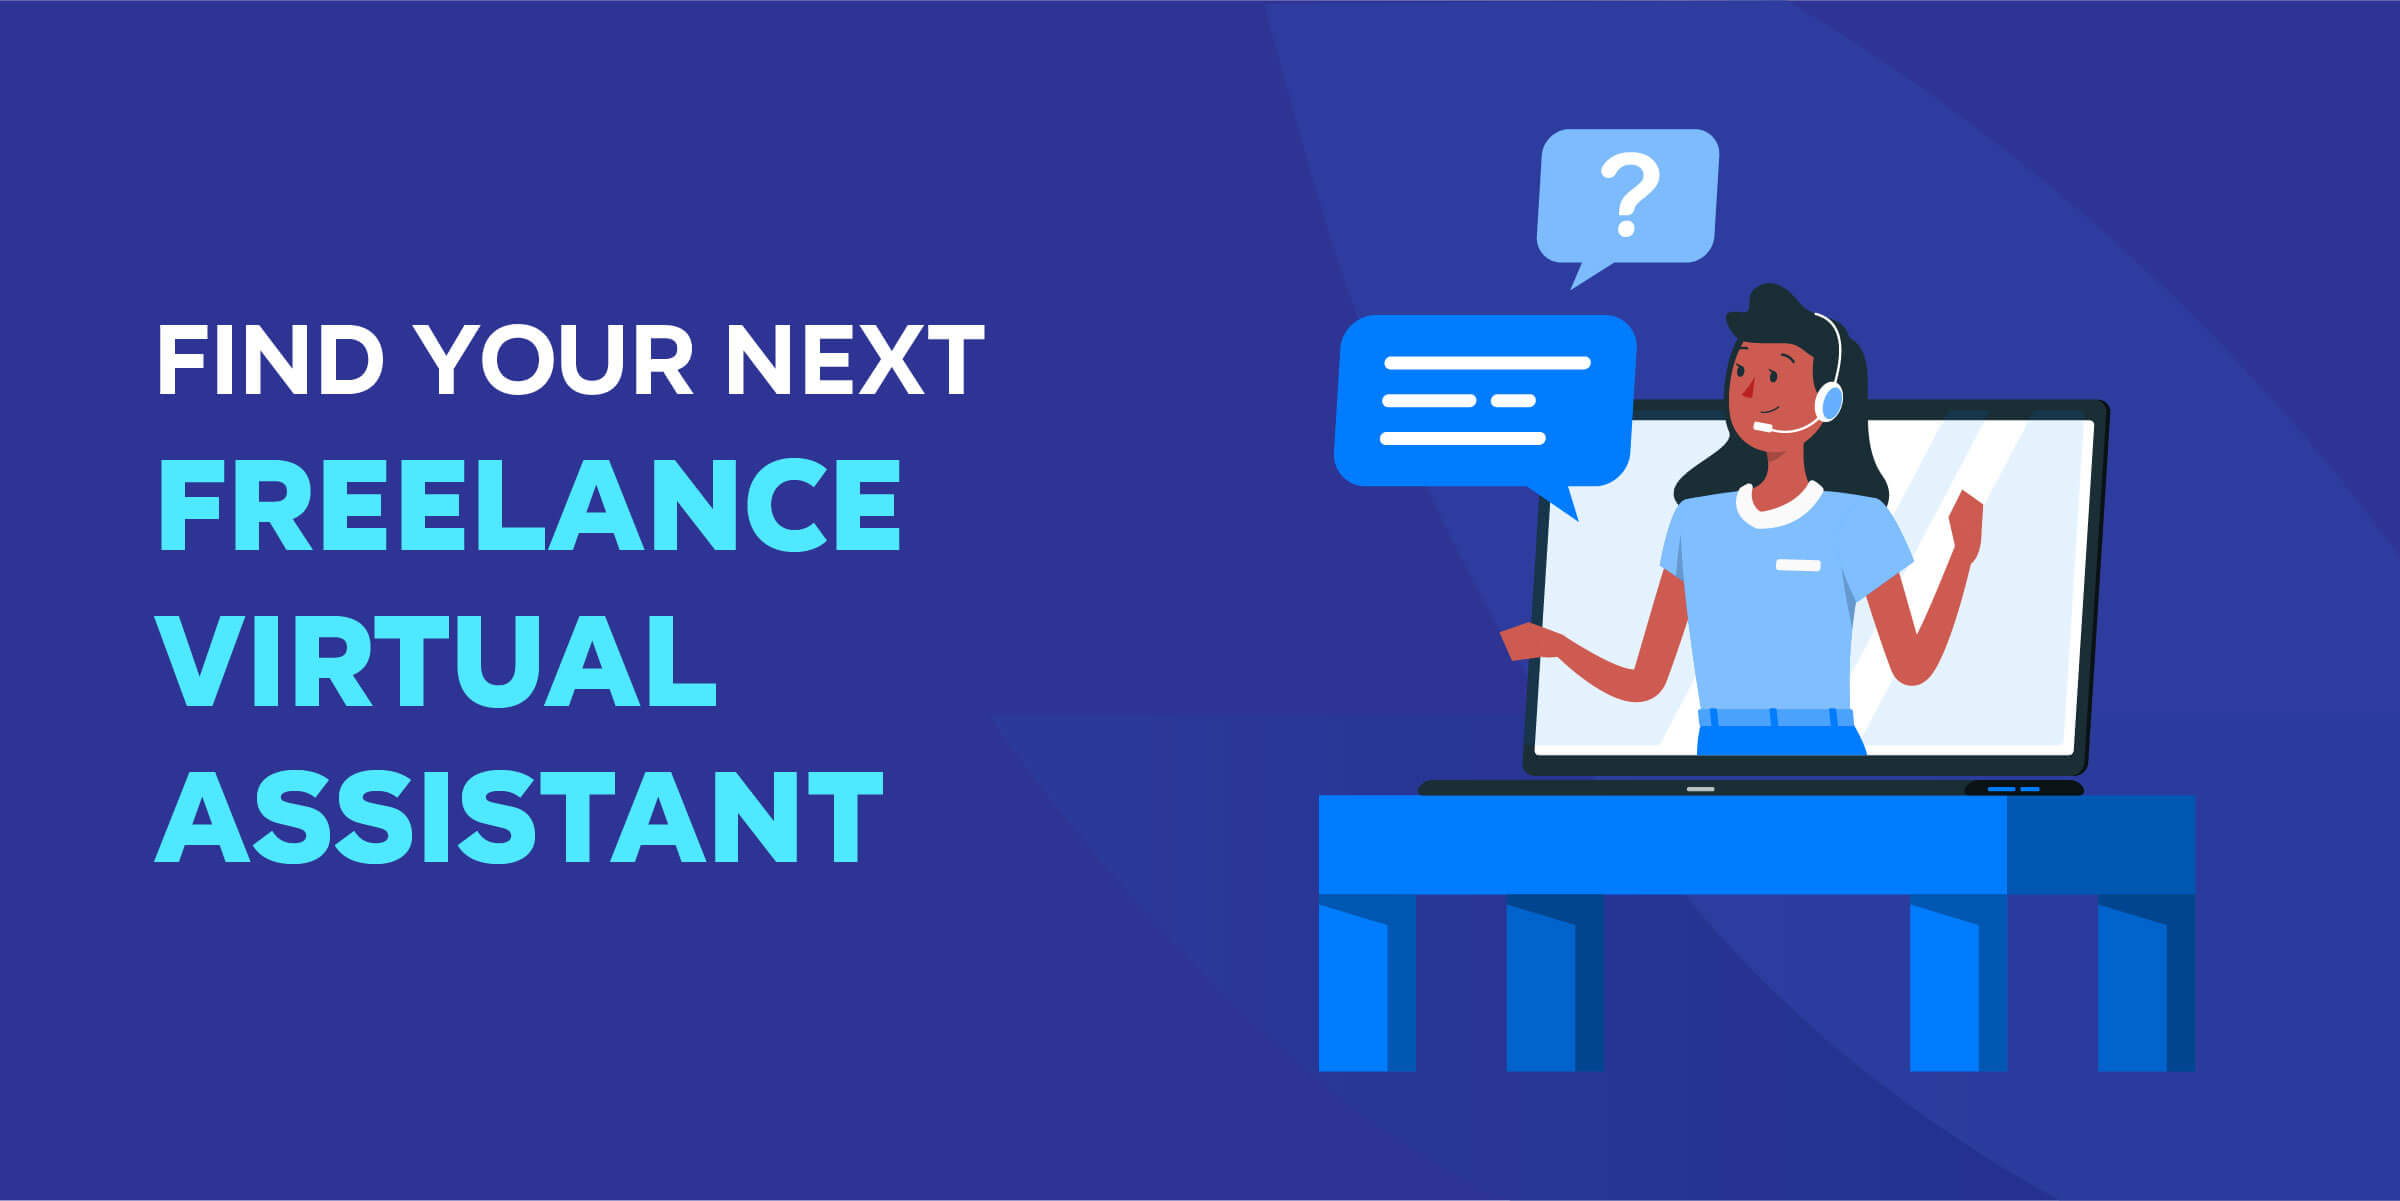 Find Your Next Freelance Virtual Assistant